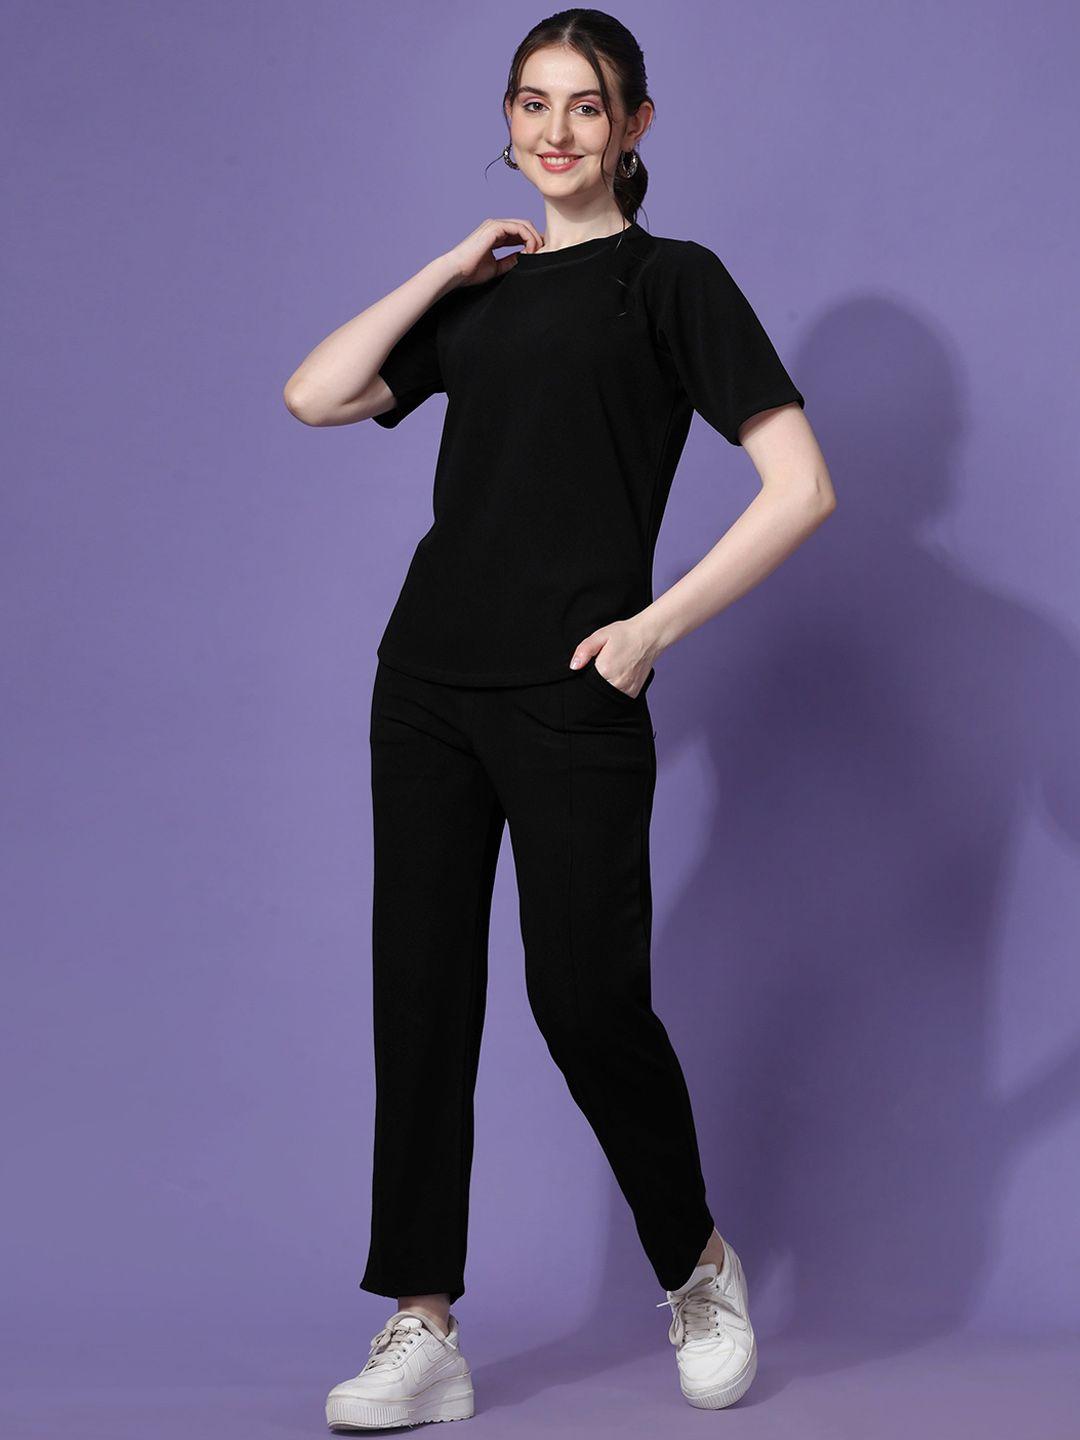 sheetal associates t-shirt with trousers co-ords